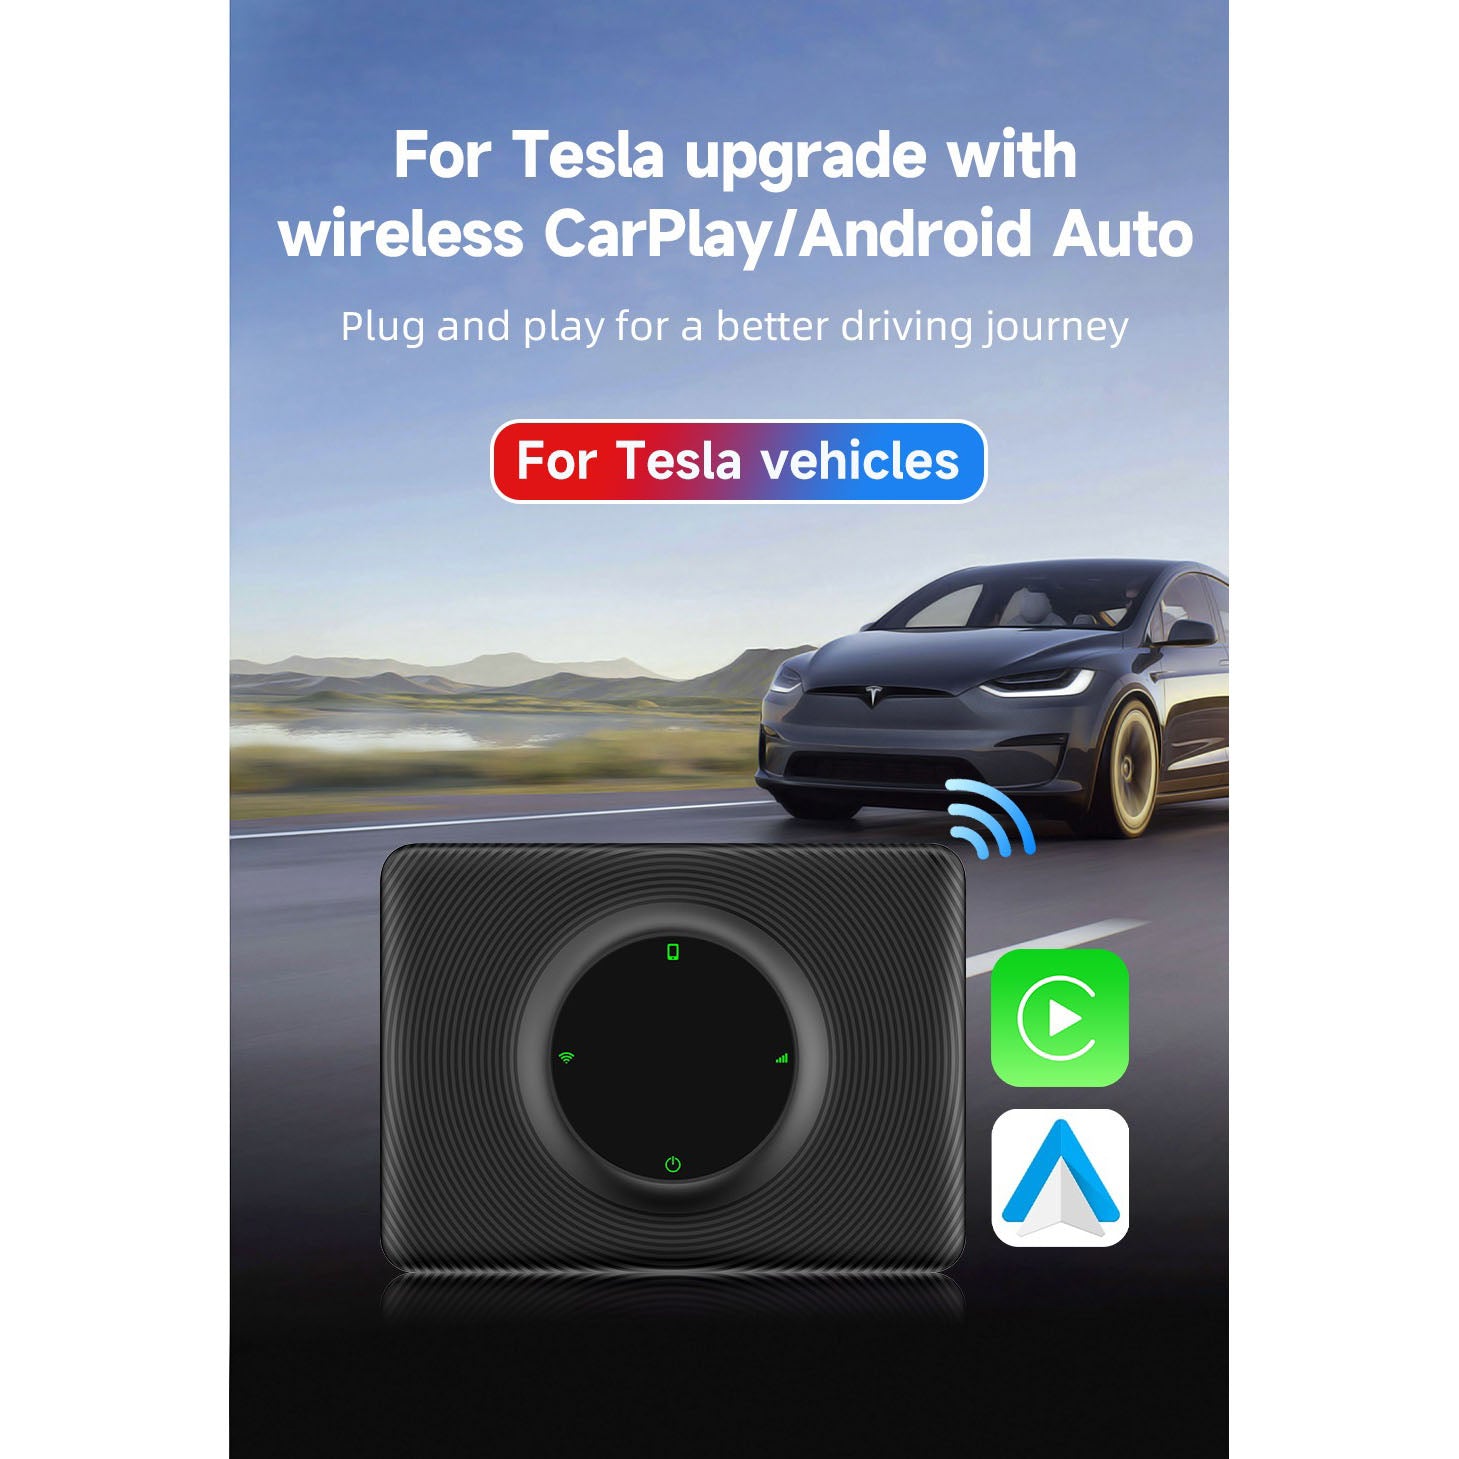 CP-AA-T Wireless CarPlay and Android Auto Upgrade for Tesla with Hands-Free Siri Control, More Navigation and Music Apps